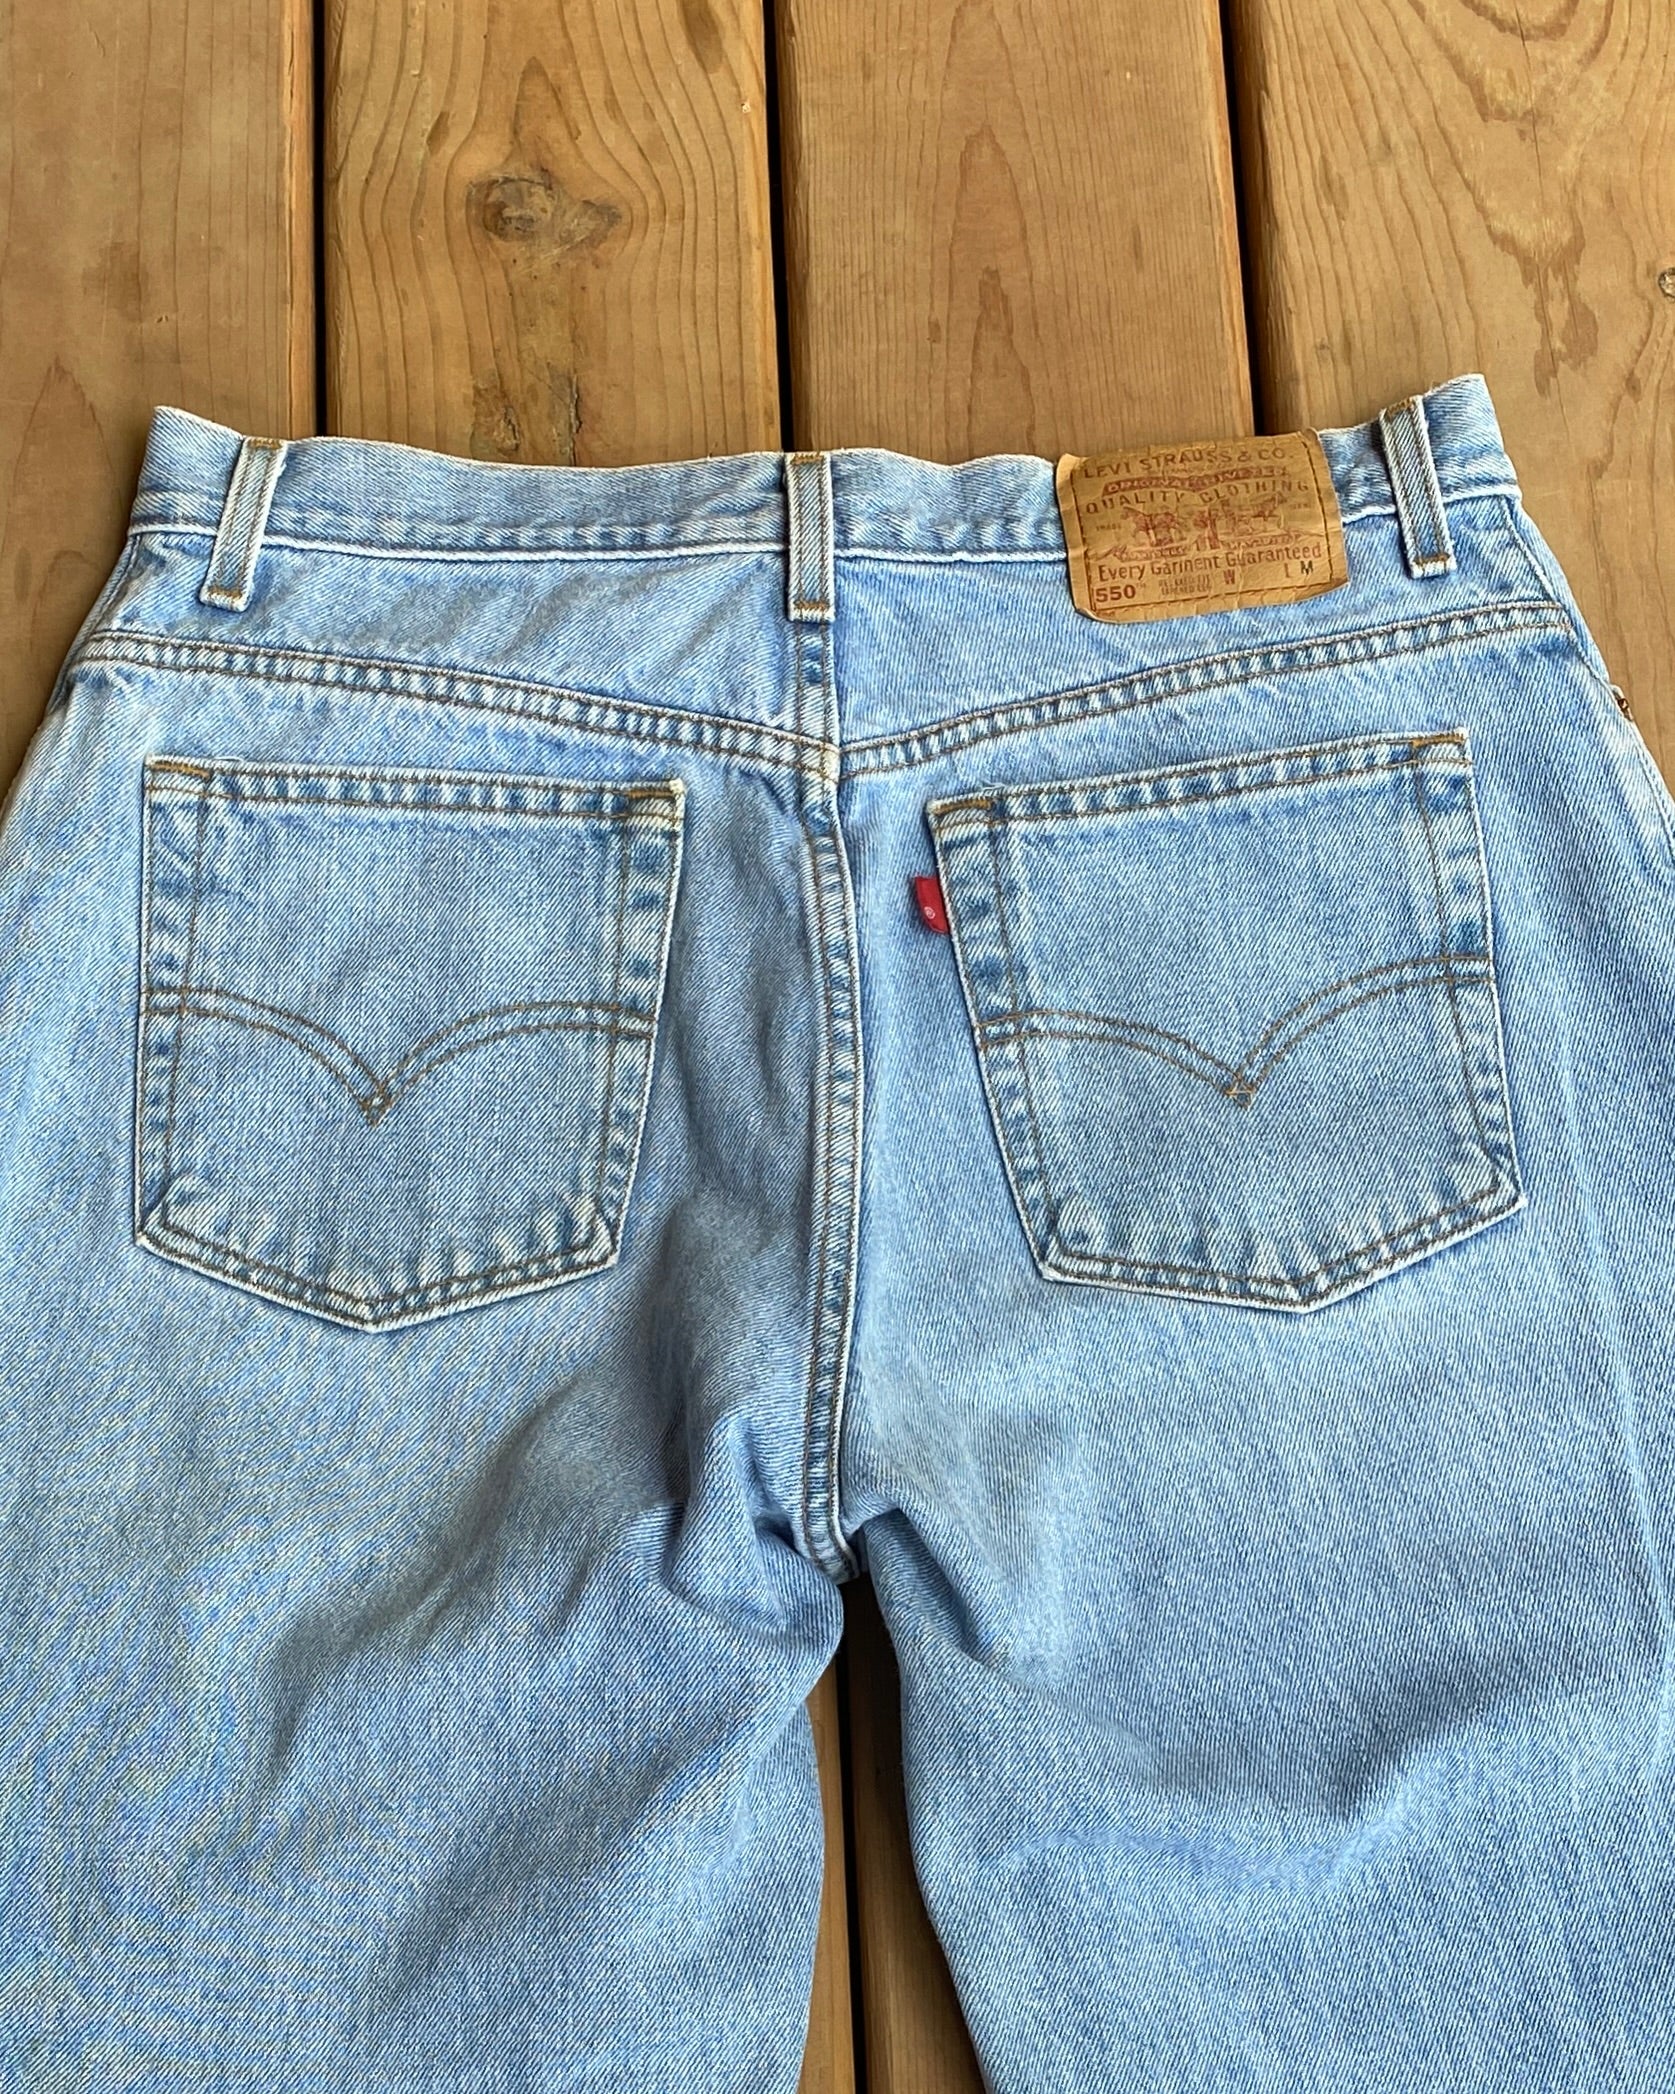 Vintage 1990s Levis 550 Relaxed Fit Light Wash Jeans size 32